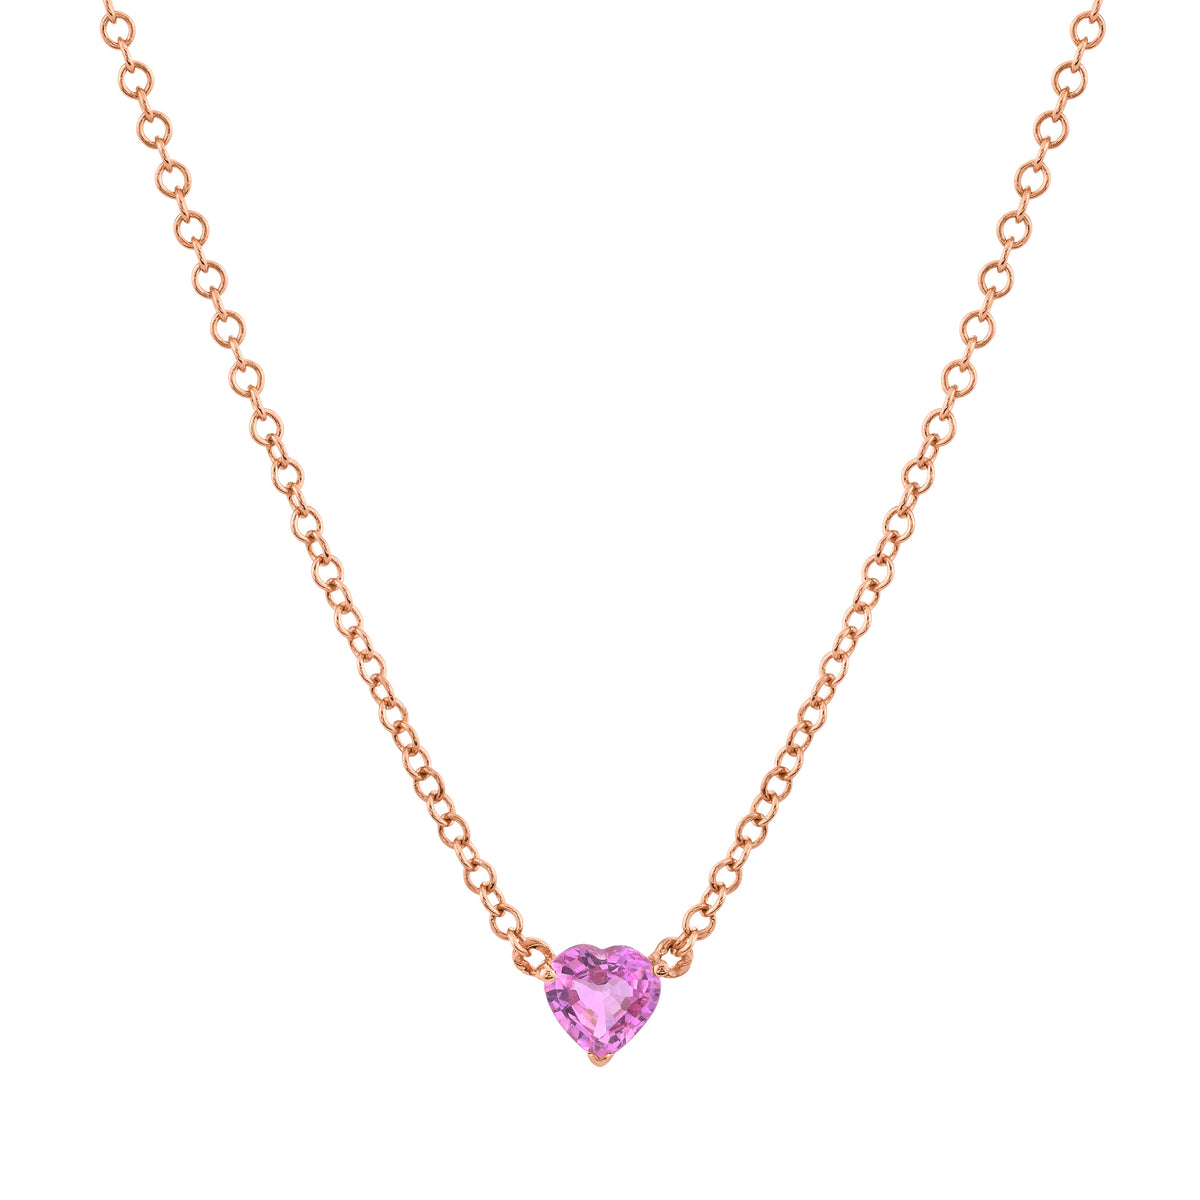 READY TO SHIP PINK SAPPHIRE BABY HEART NECKLACE